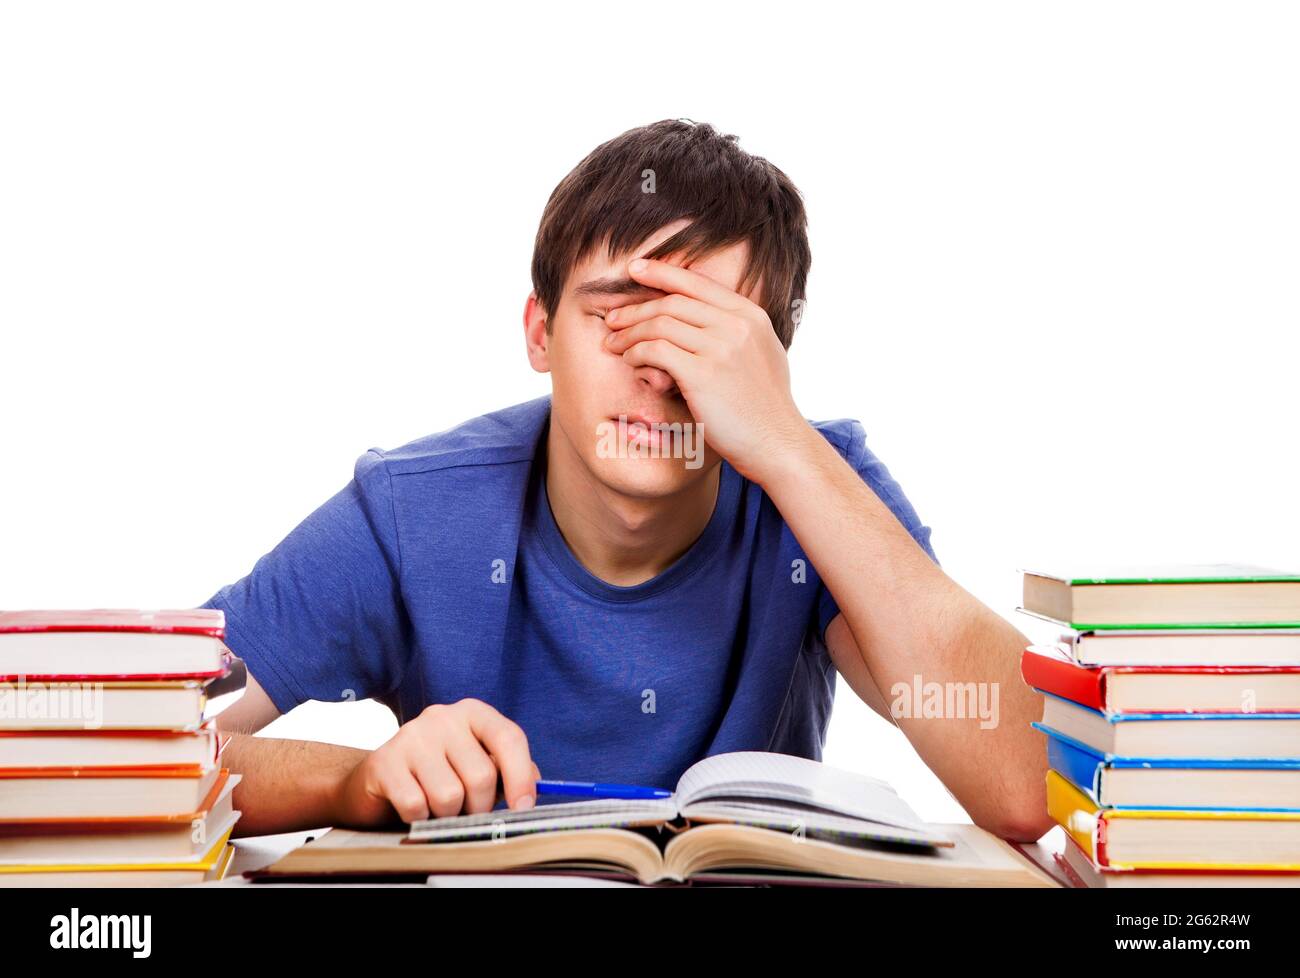 Tired Teenager Rub the Eyes on the School Desk Isolated on the White Background Stock Photo